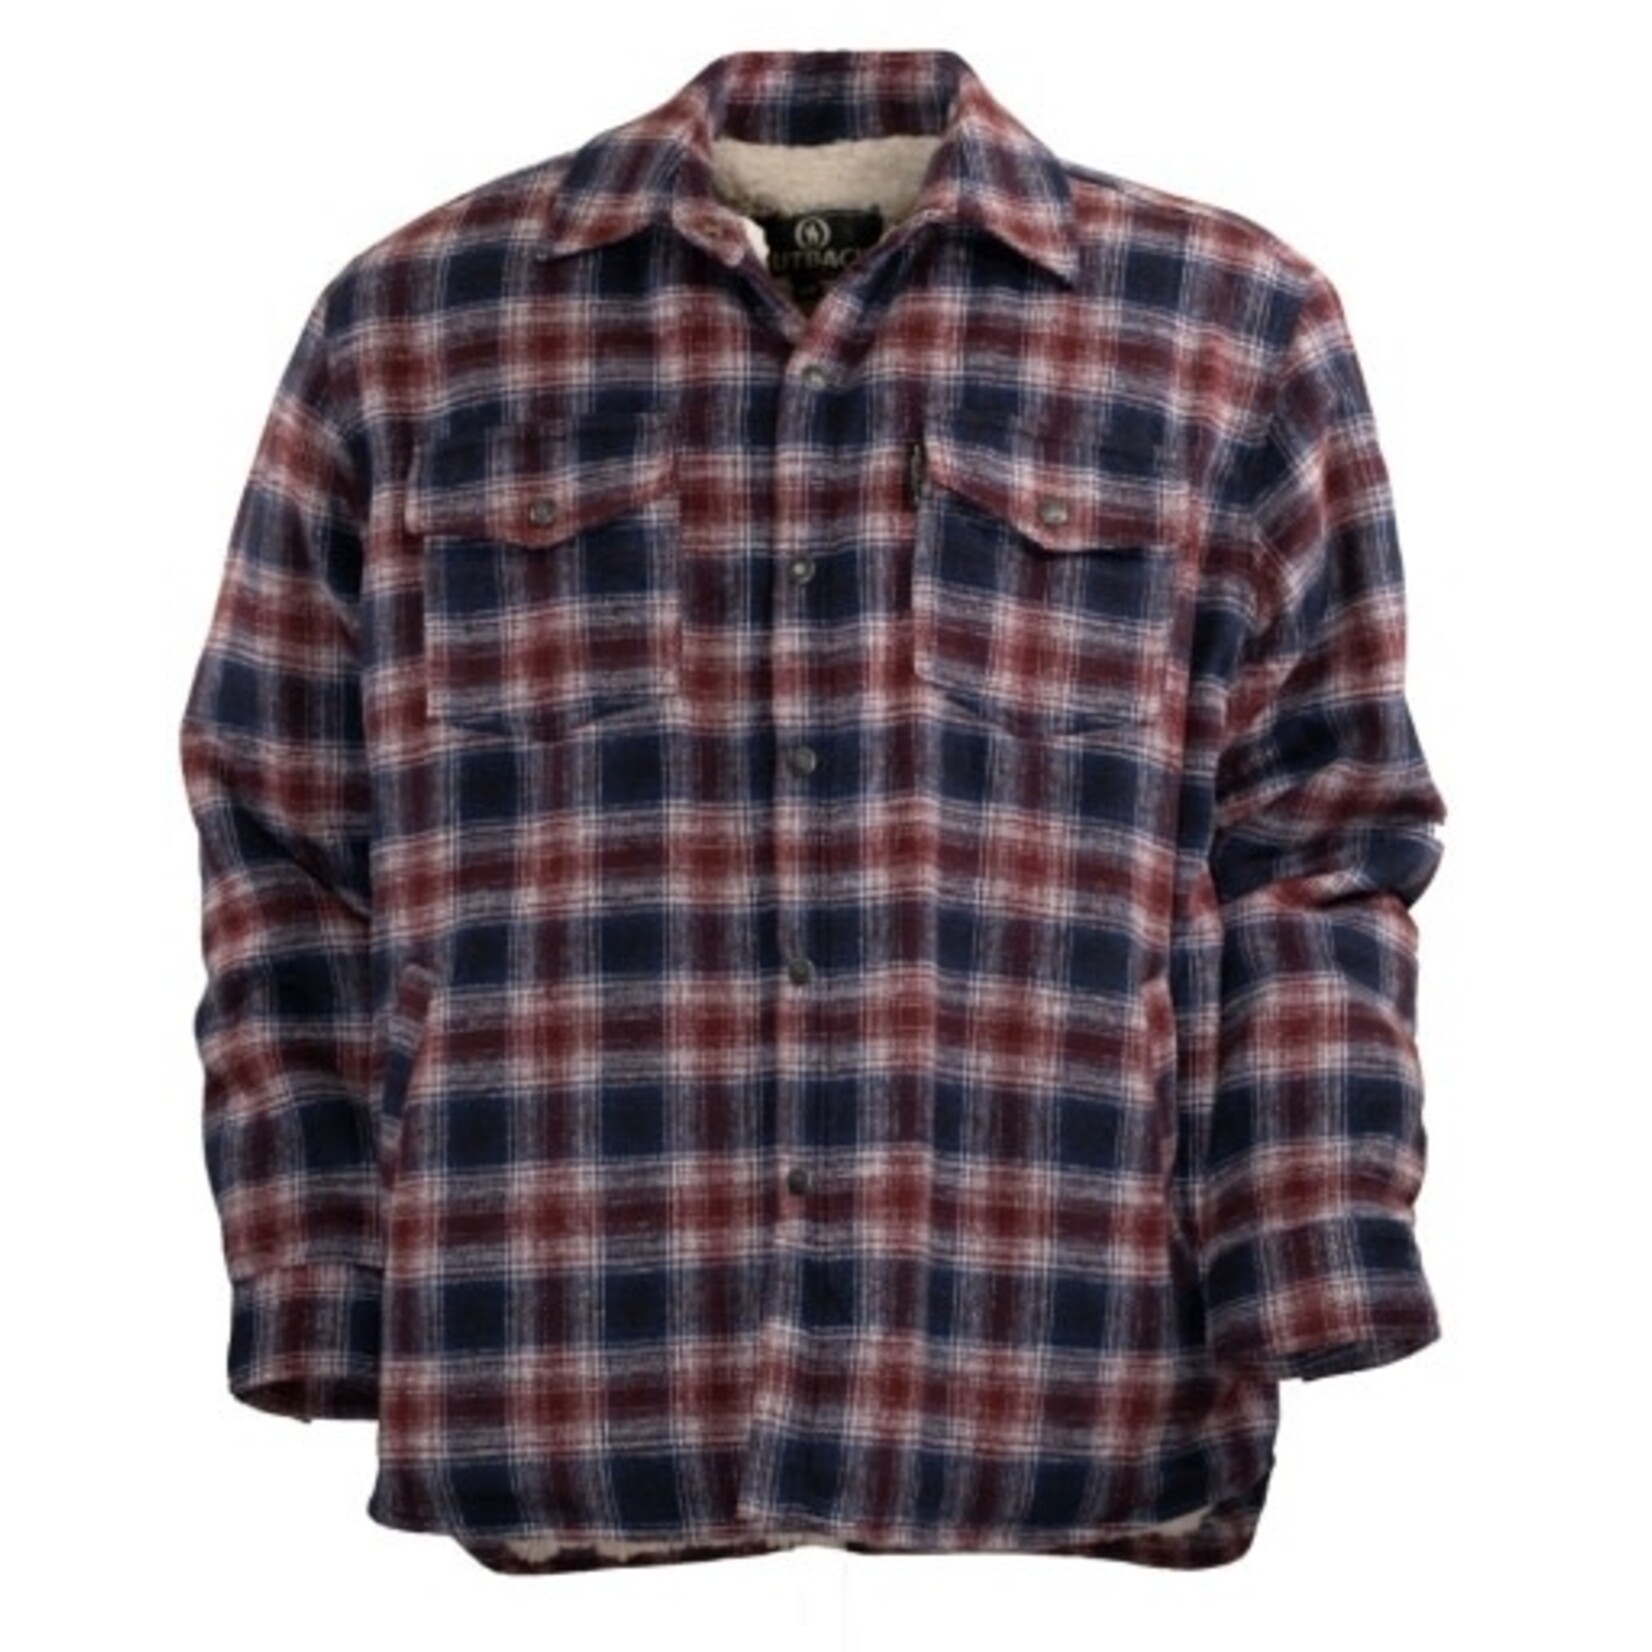 Outback Trading Co. Outback Trading Co. Mens Arden Jacket